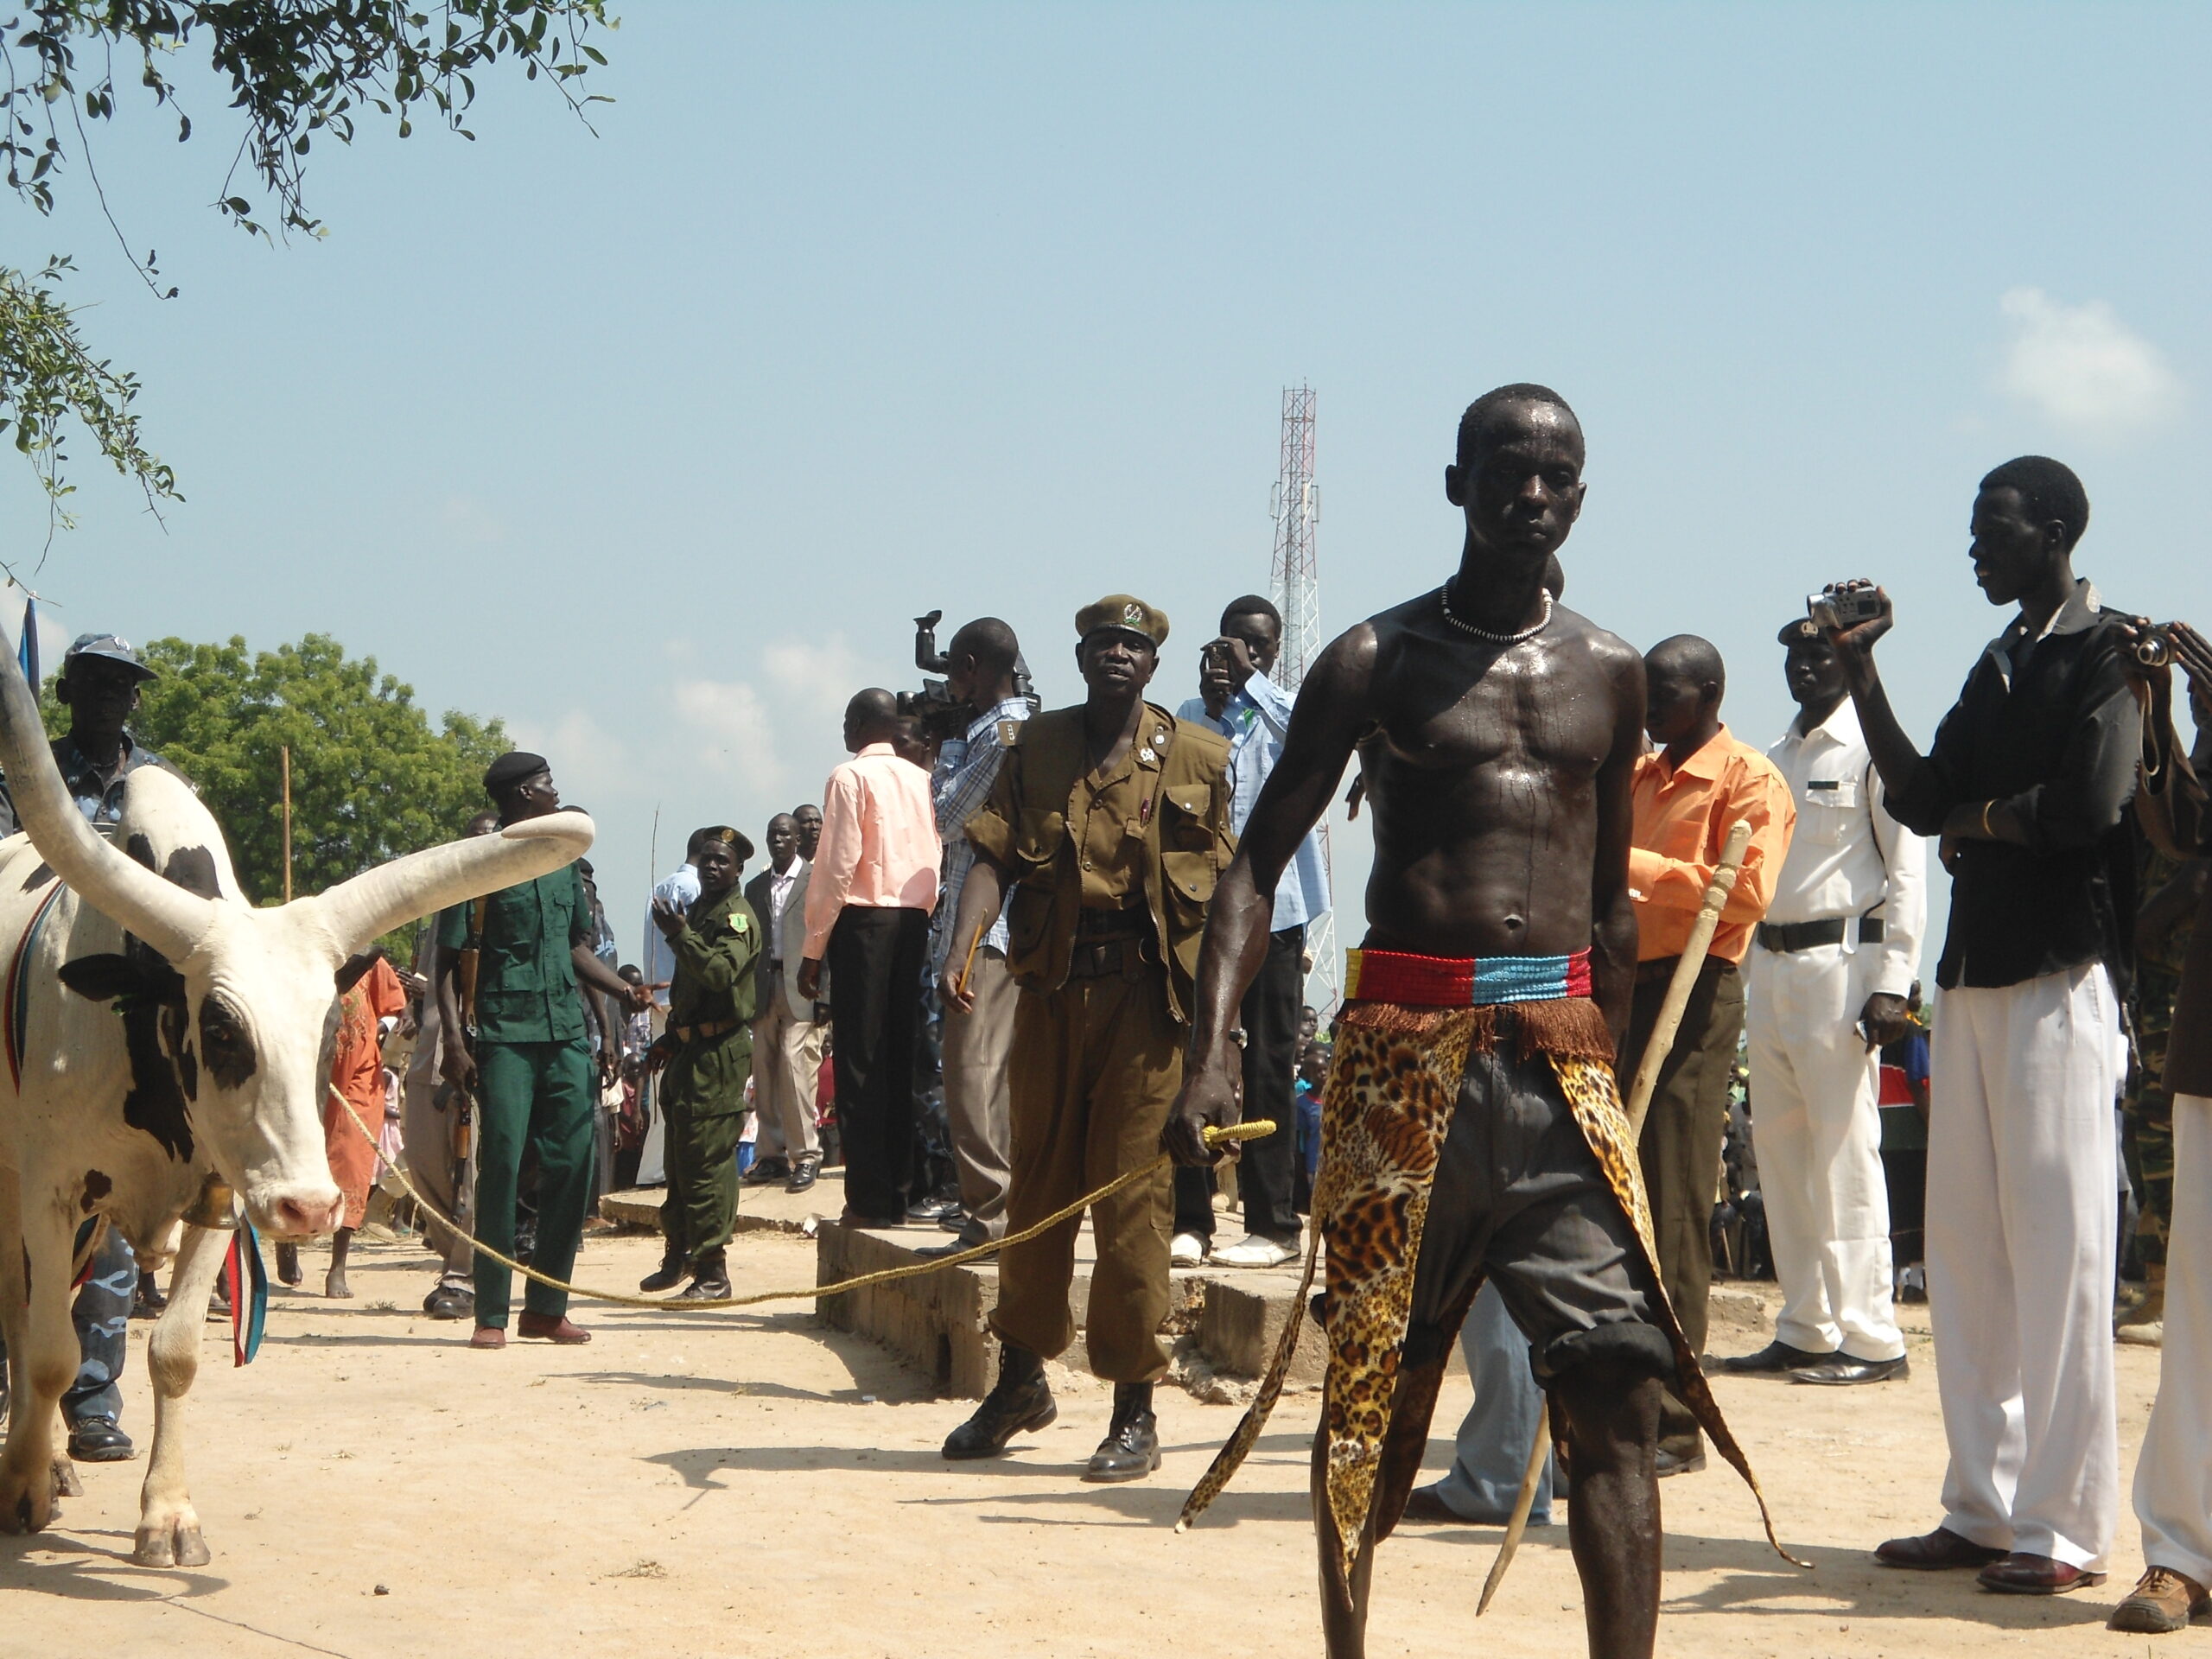 Manyiel Thon Diing, a young man from Jonglei State, praising his bull at the Panyagoor celebrations of South Sudan's independence, 9 July 2012 (ST)